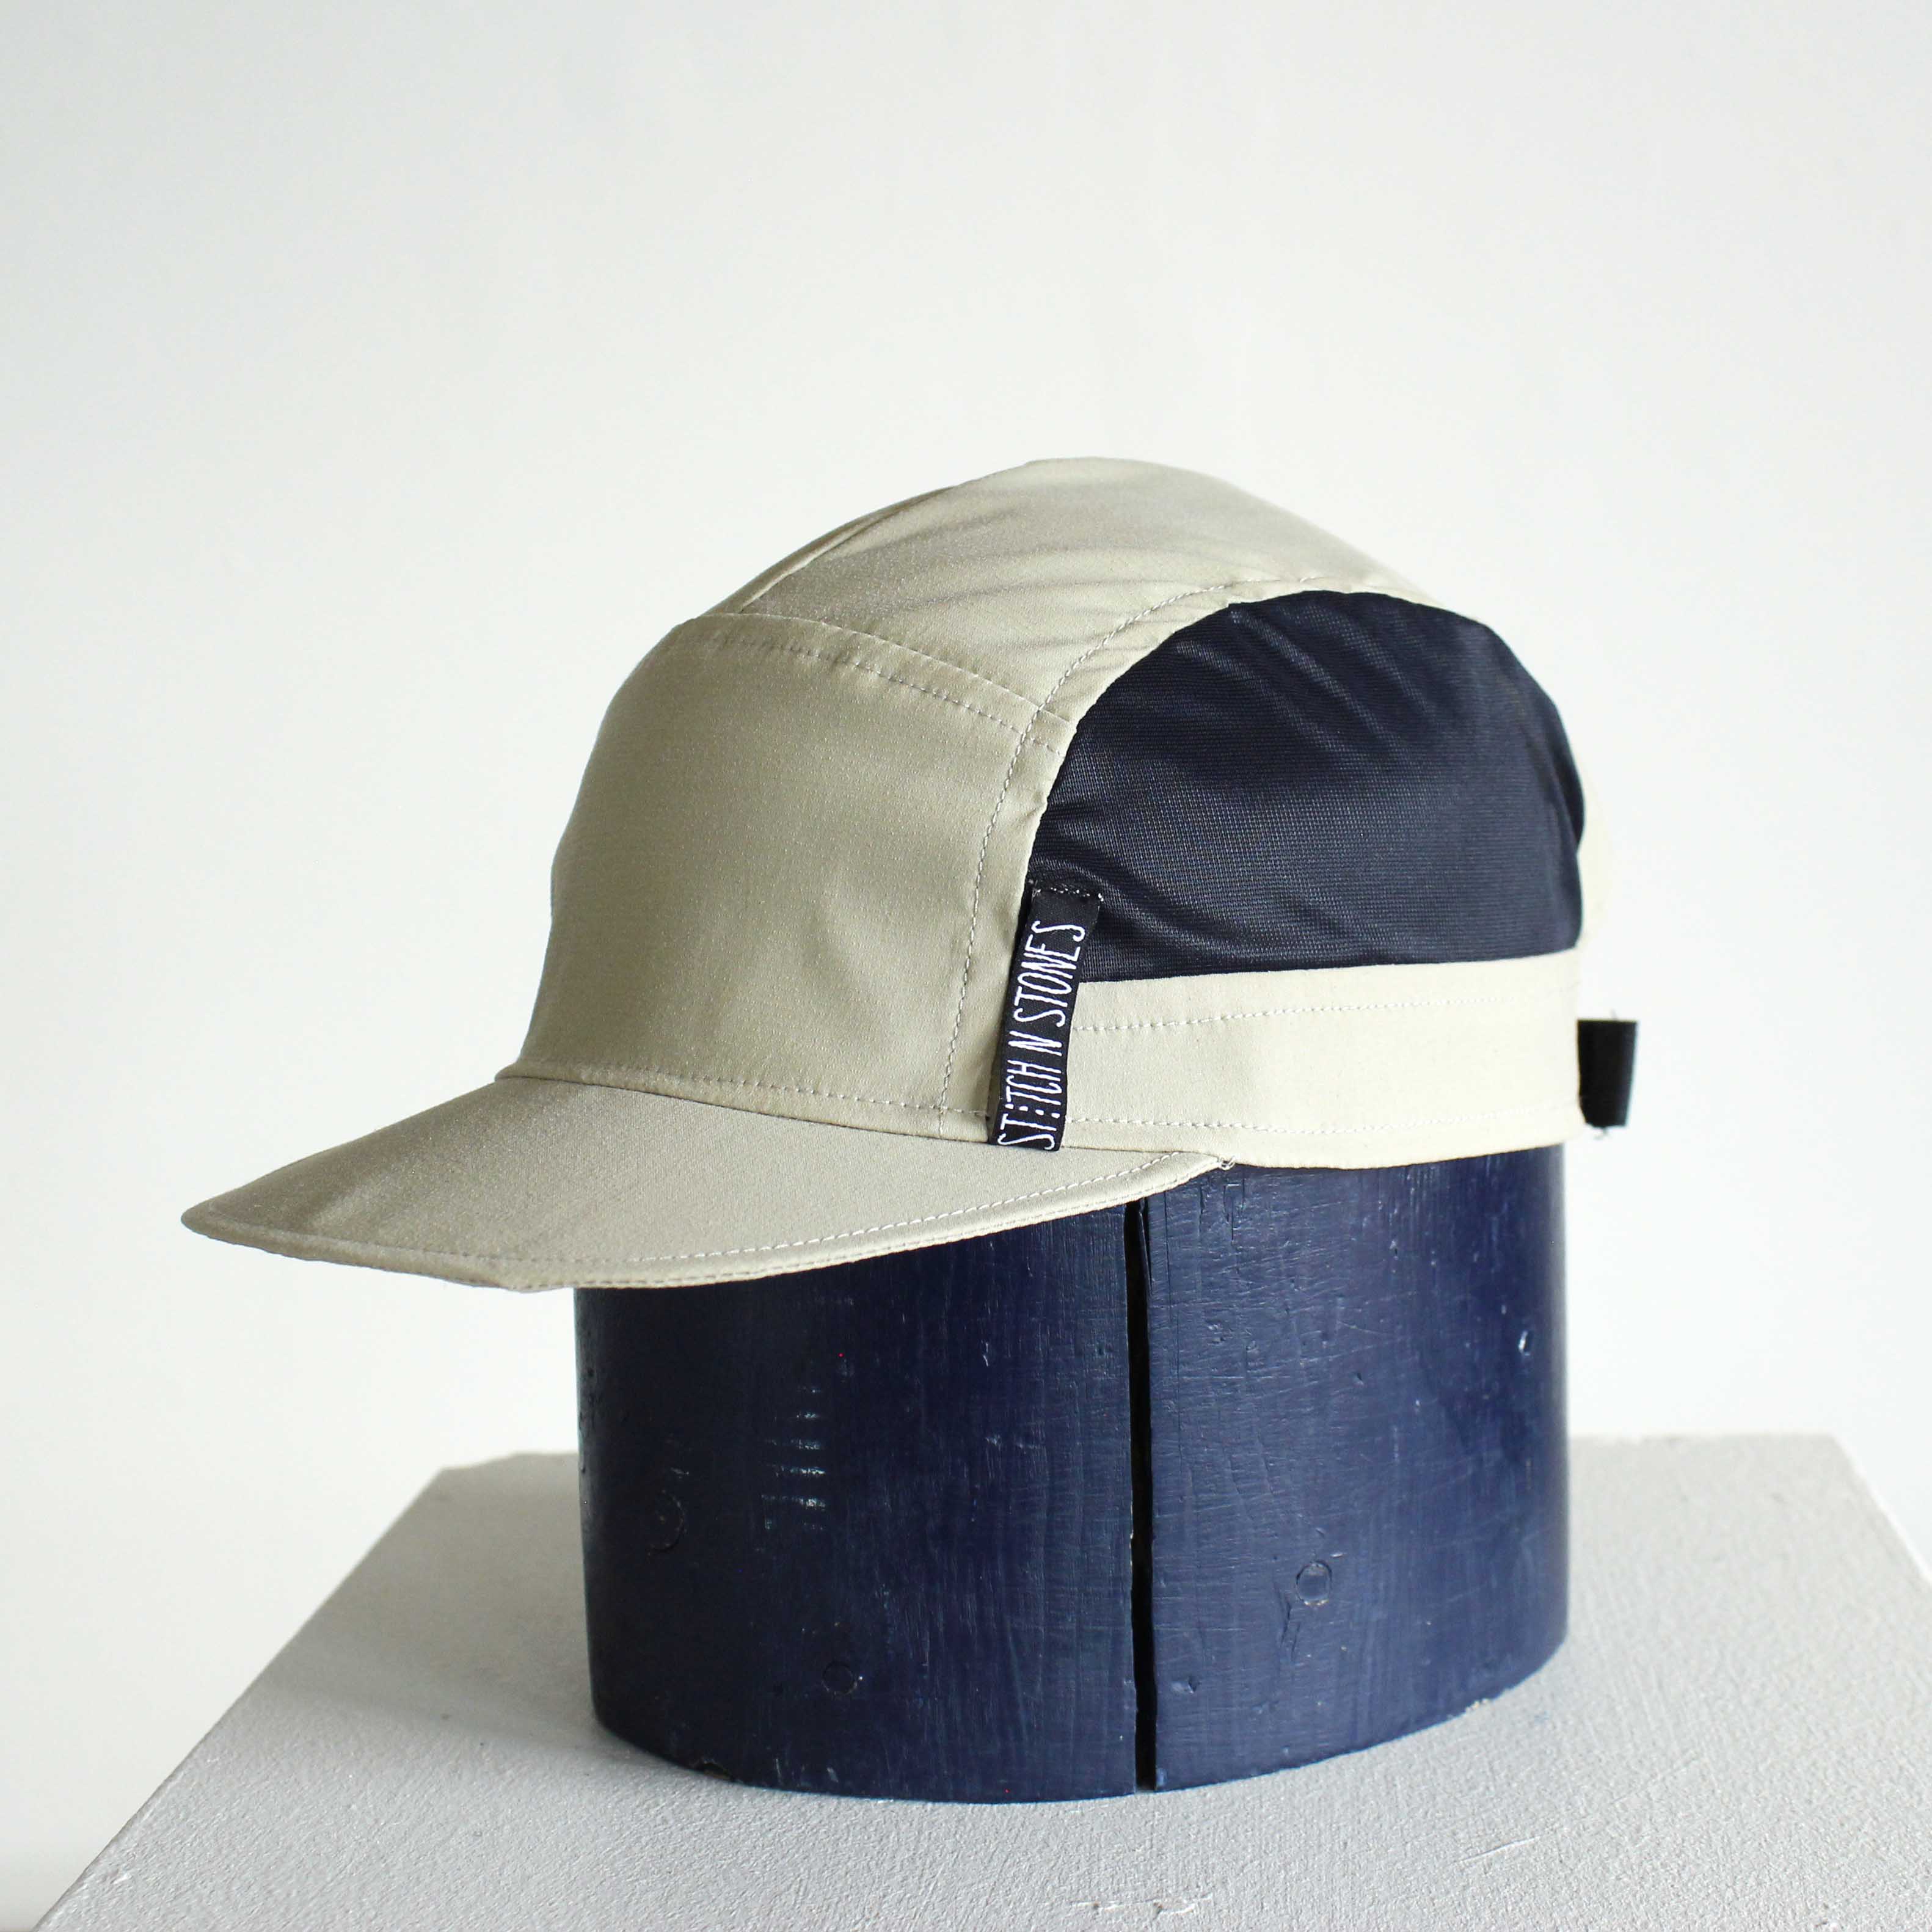 All Mtn Cap sand, small patch